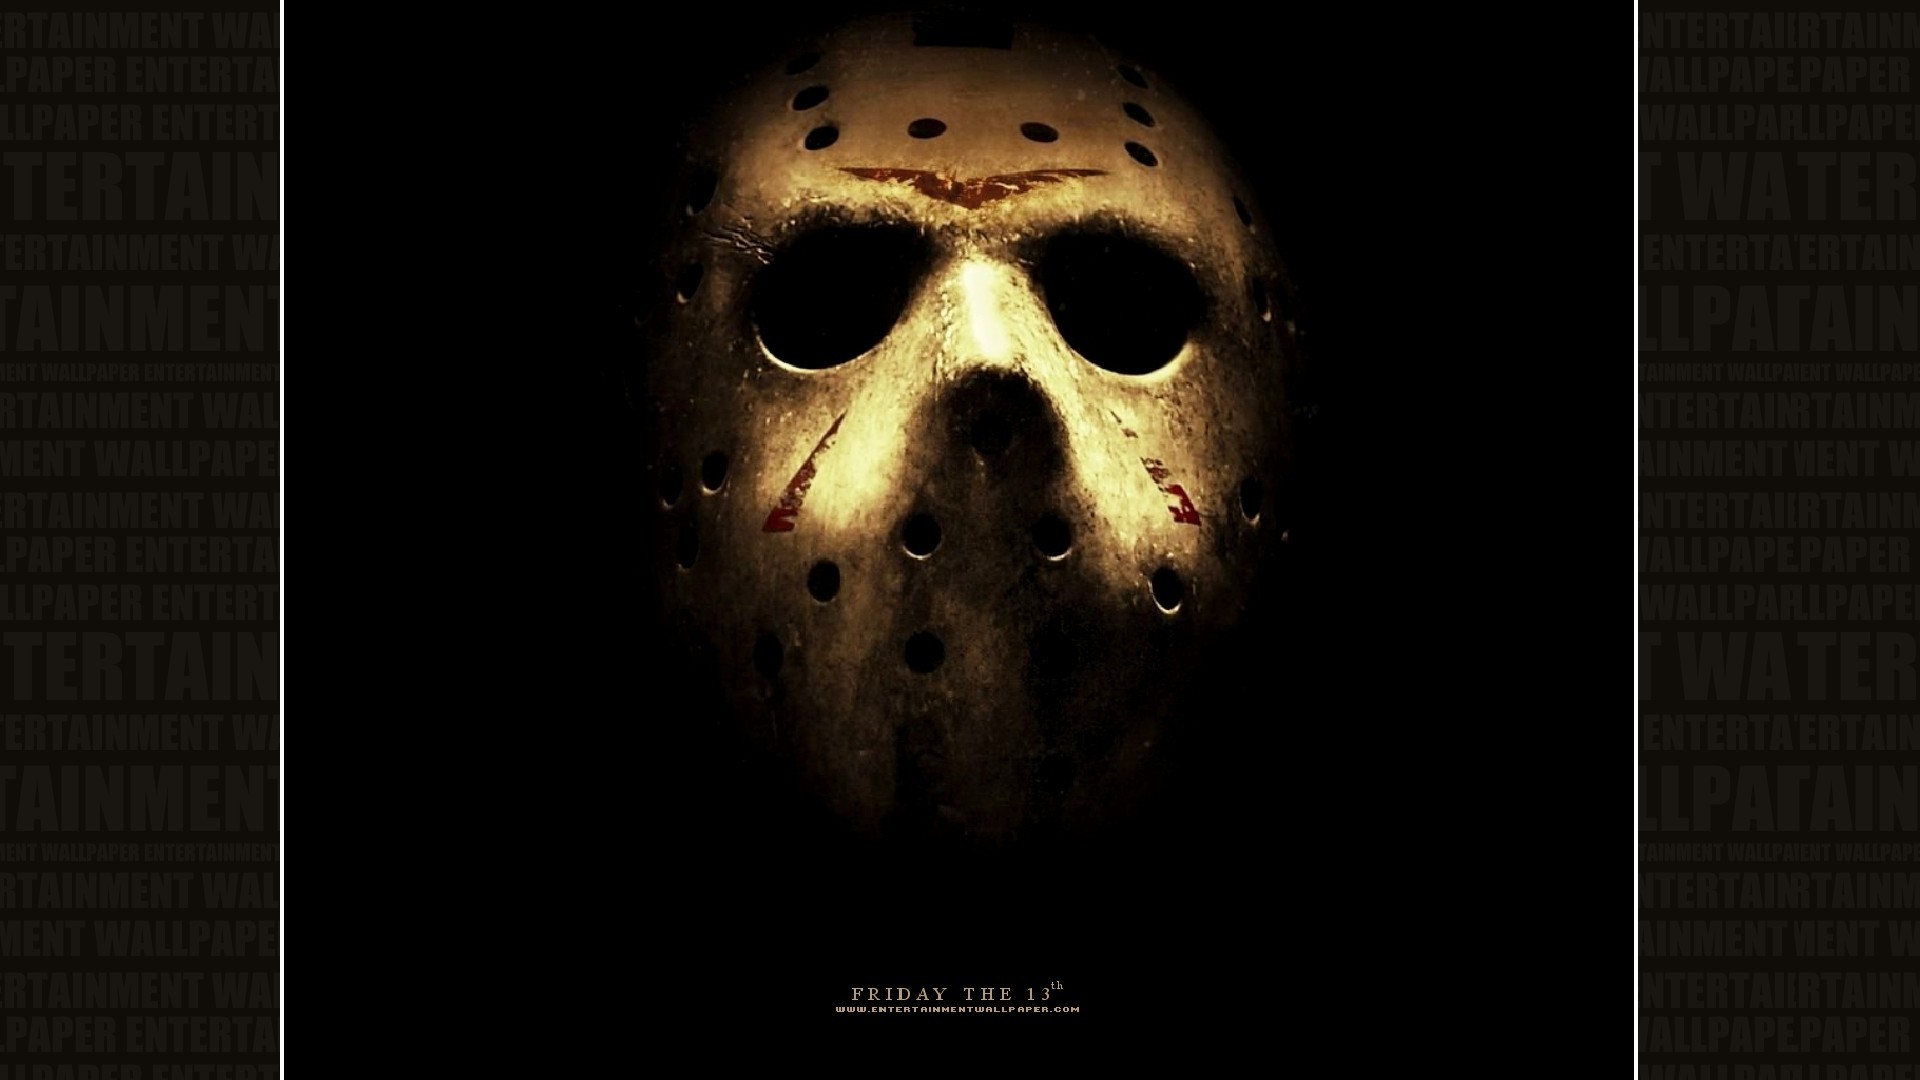 1920x1080 Friday the 13th Wallpaper - Original size, download now.